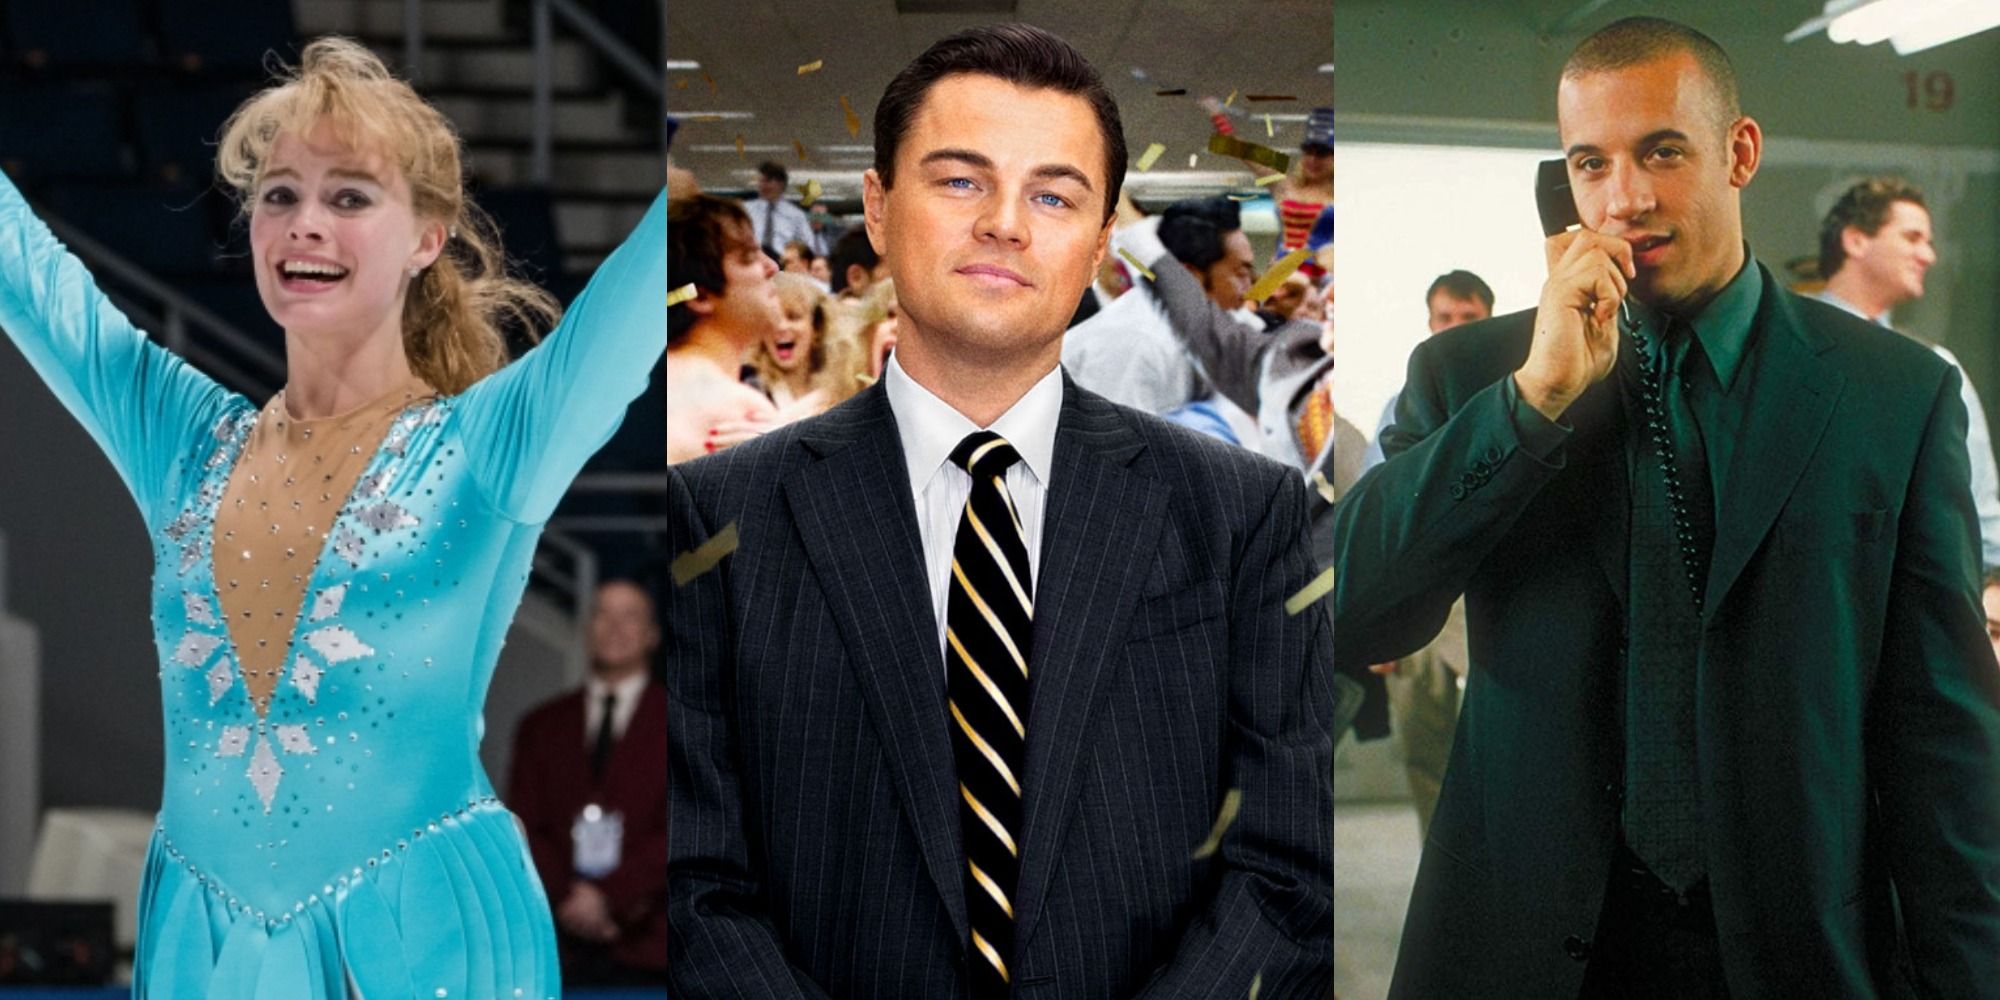 wolf of wall street movie free download